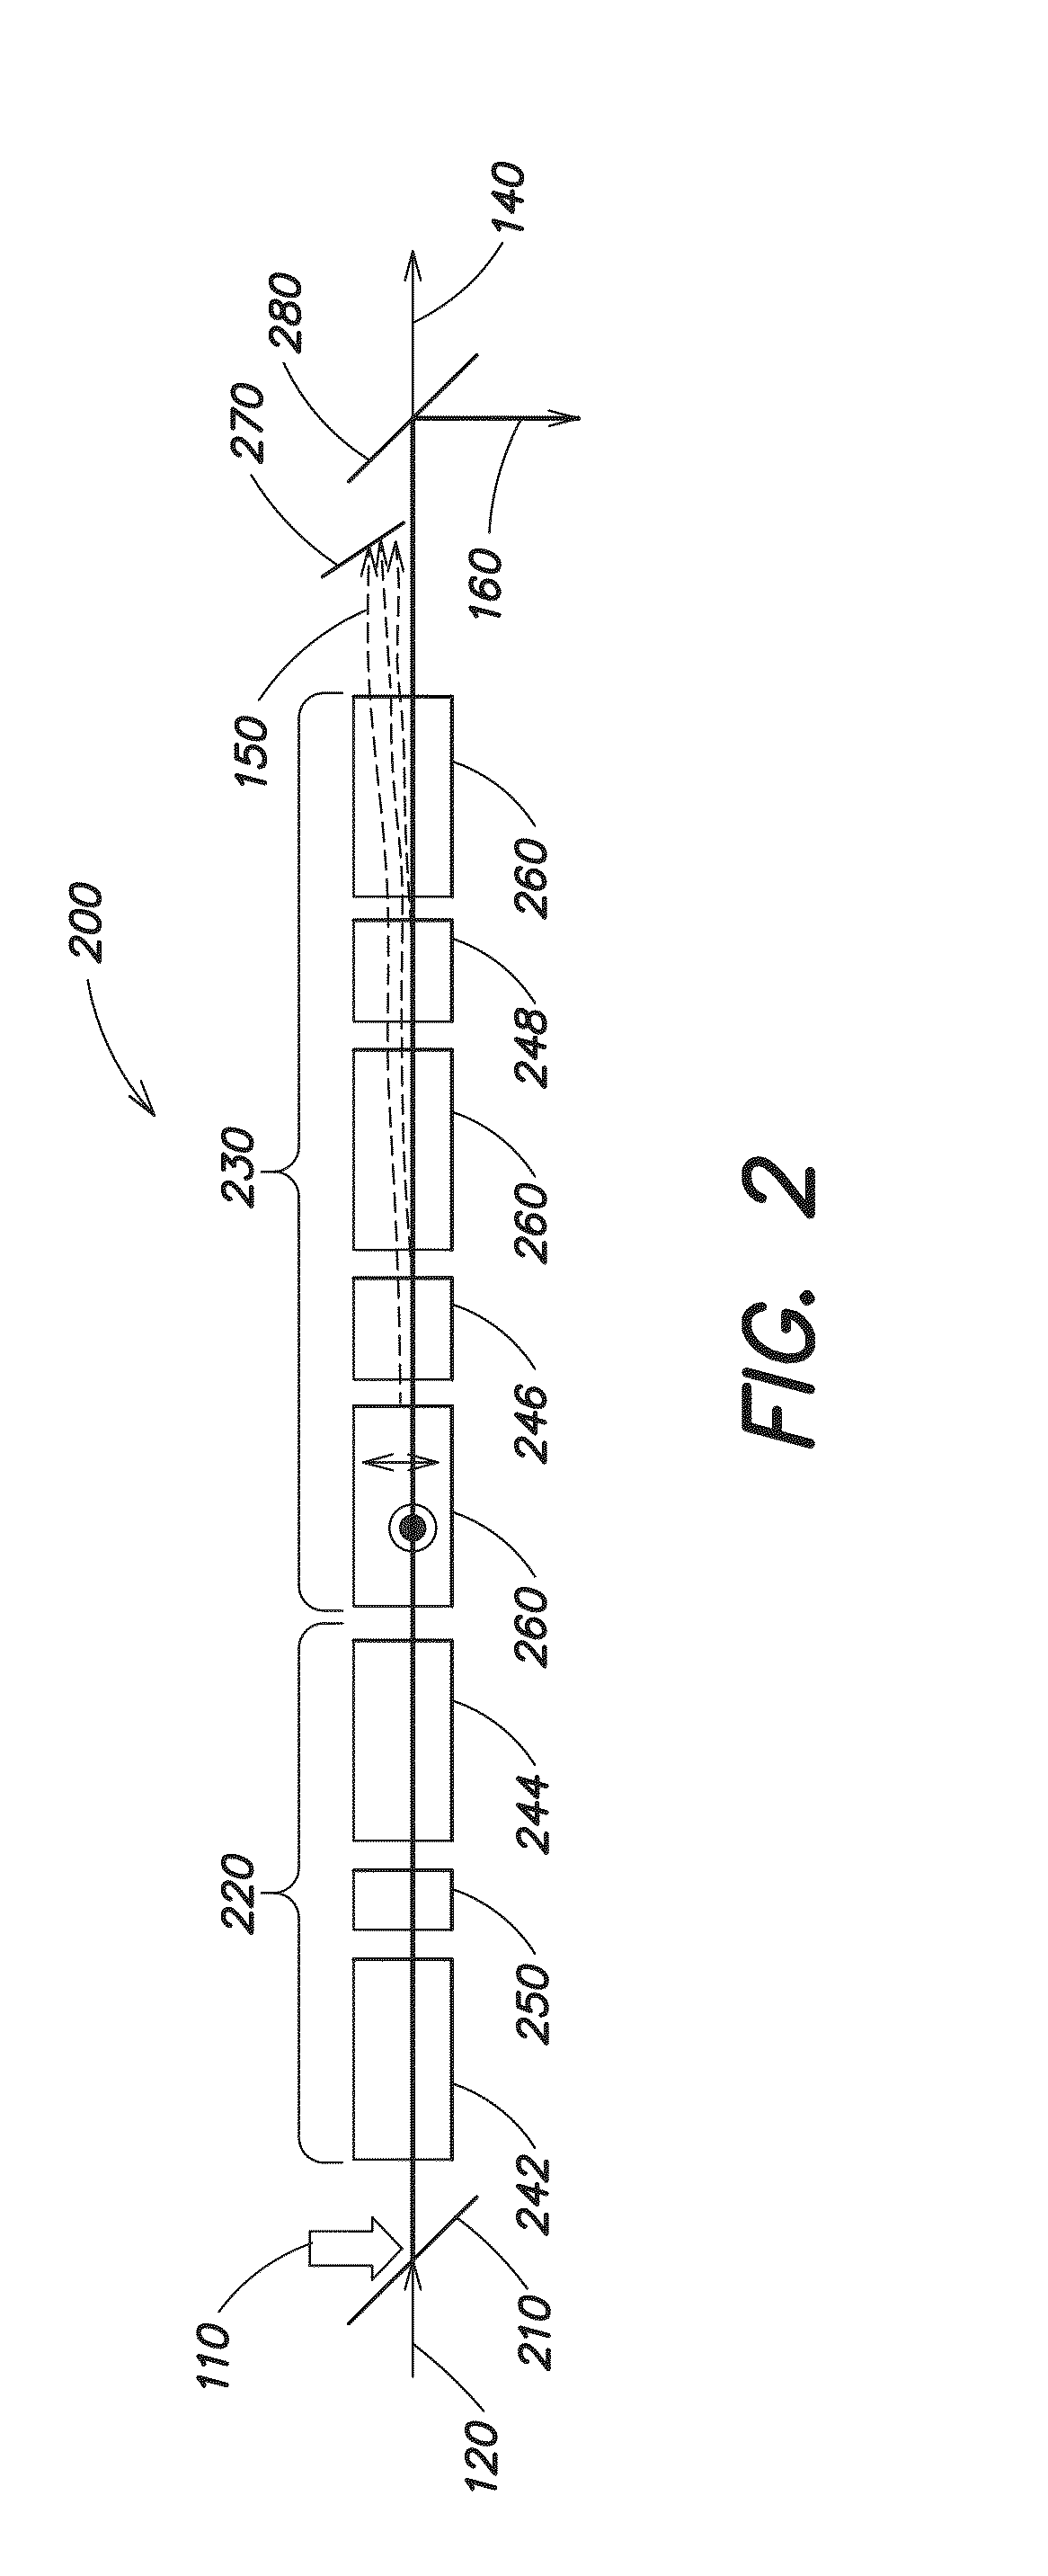 Methods and apparatus for idler extraction in high power optical parametric amplifiers